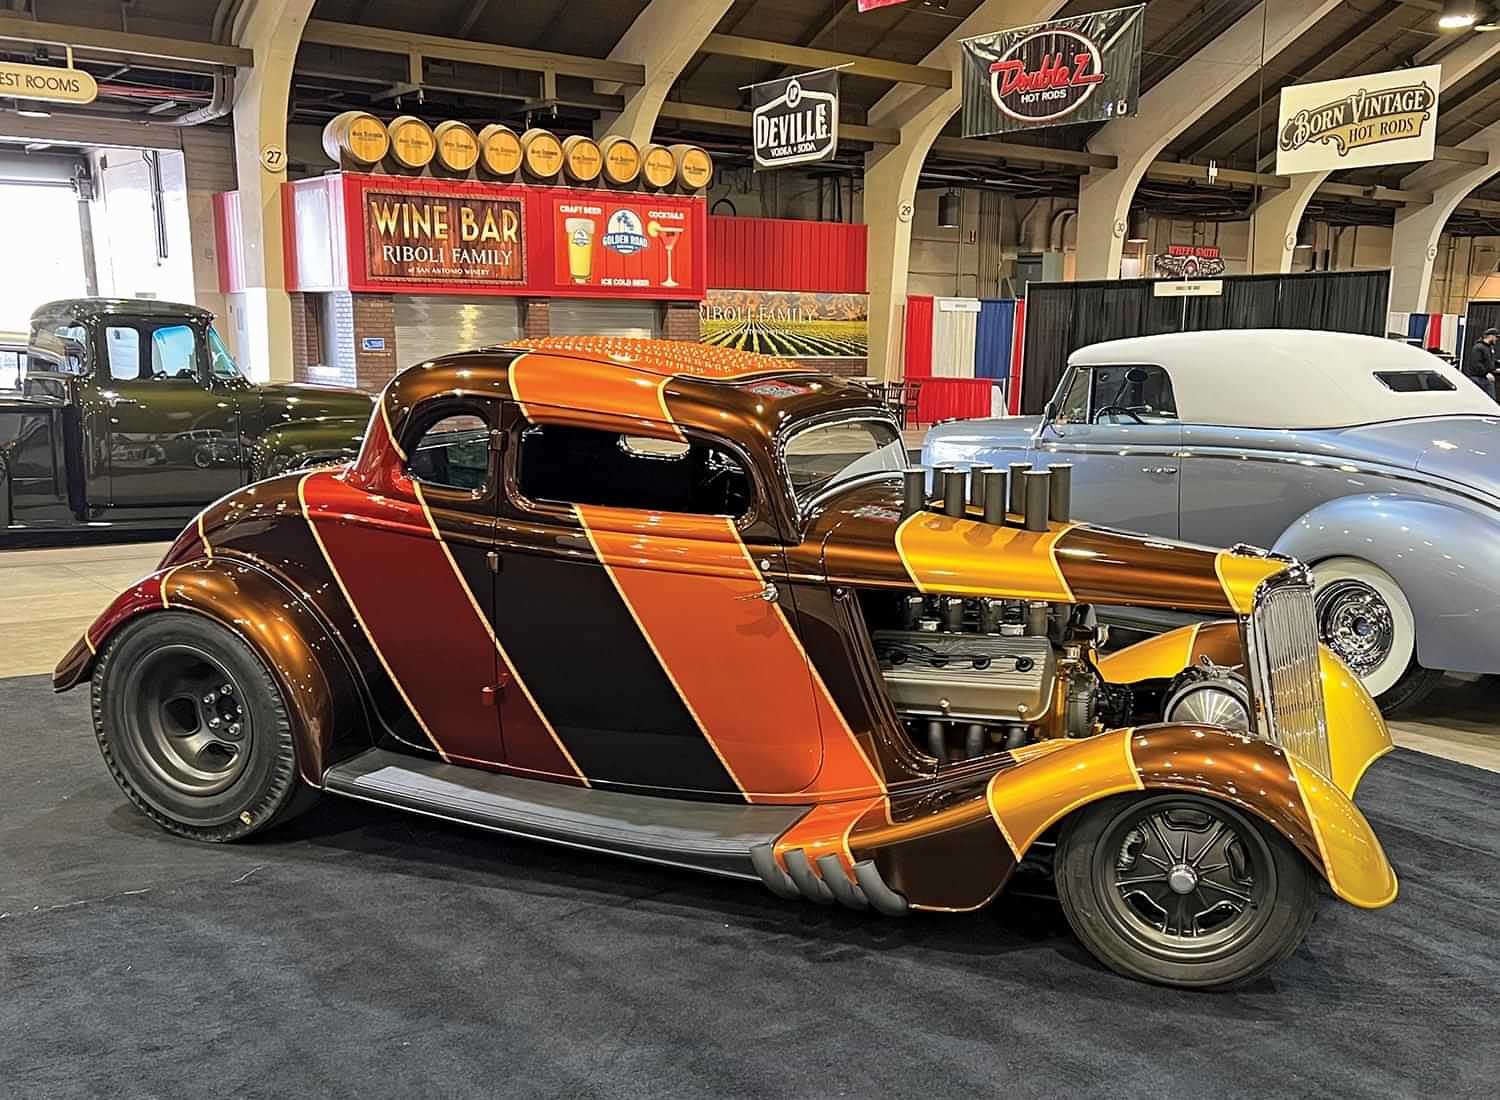 three quarter passenger side view of a ’34 Ford five-window coupe with its side hood panels removed and covered vertically with thick diagonal lines of mustard, orange, dark red and brown